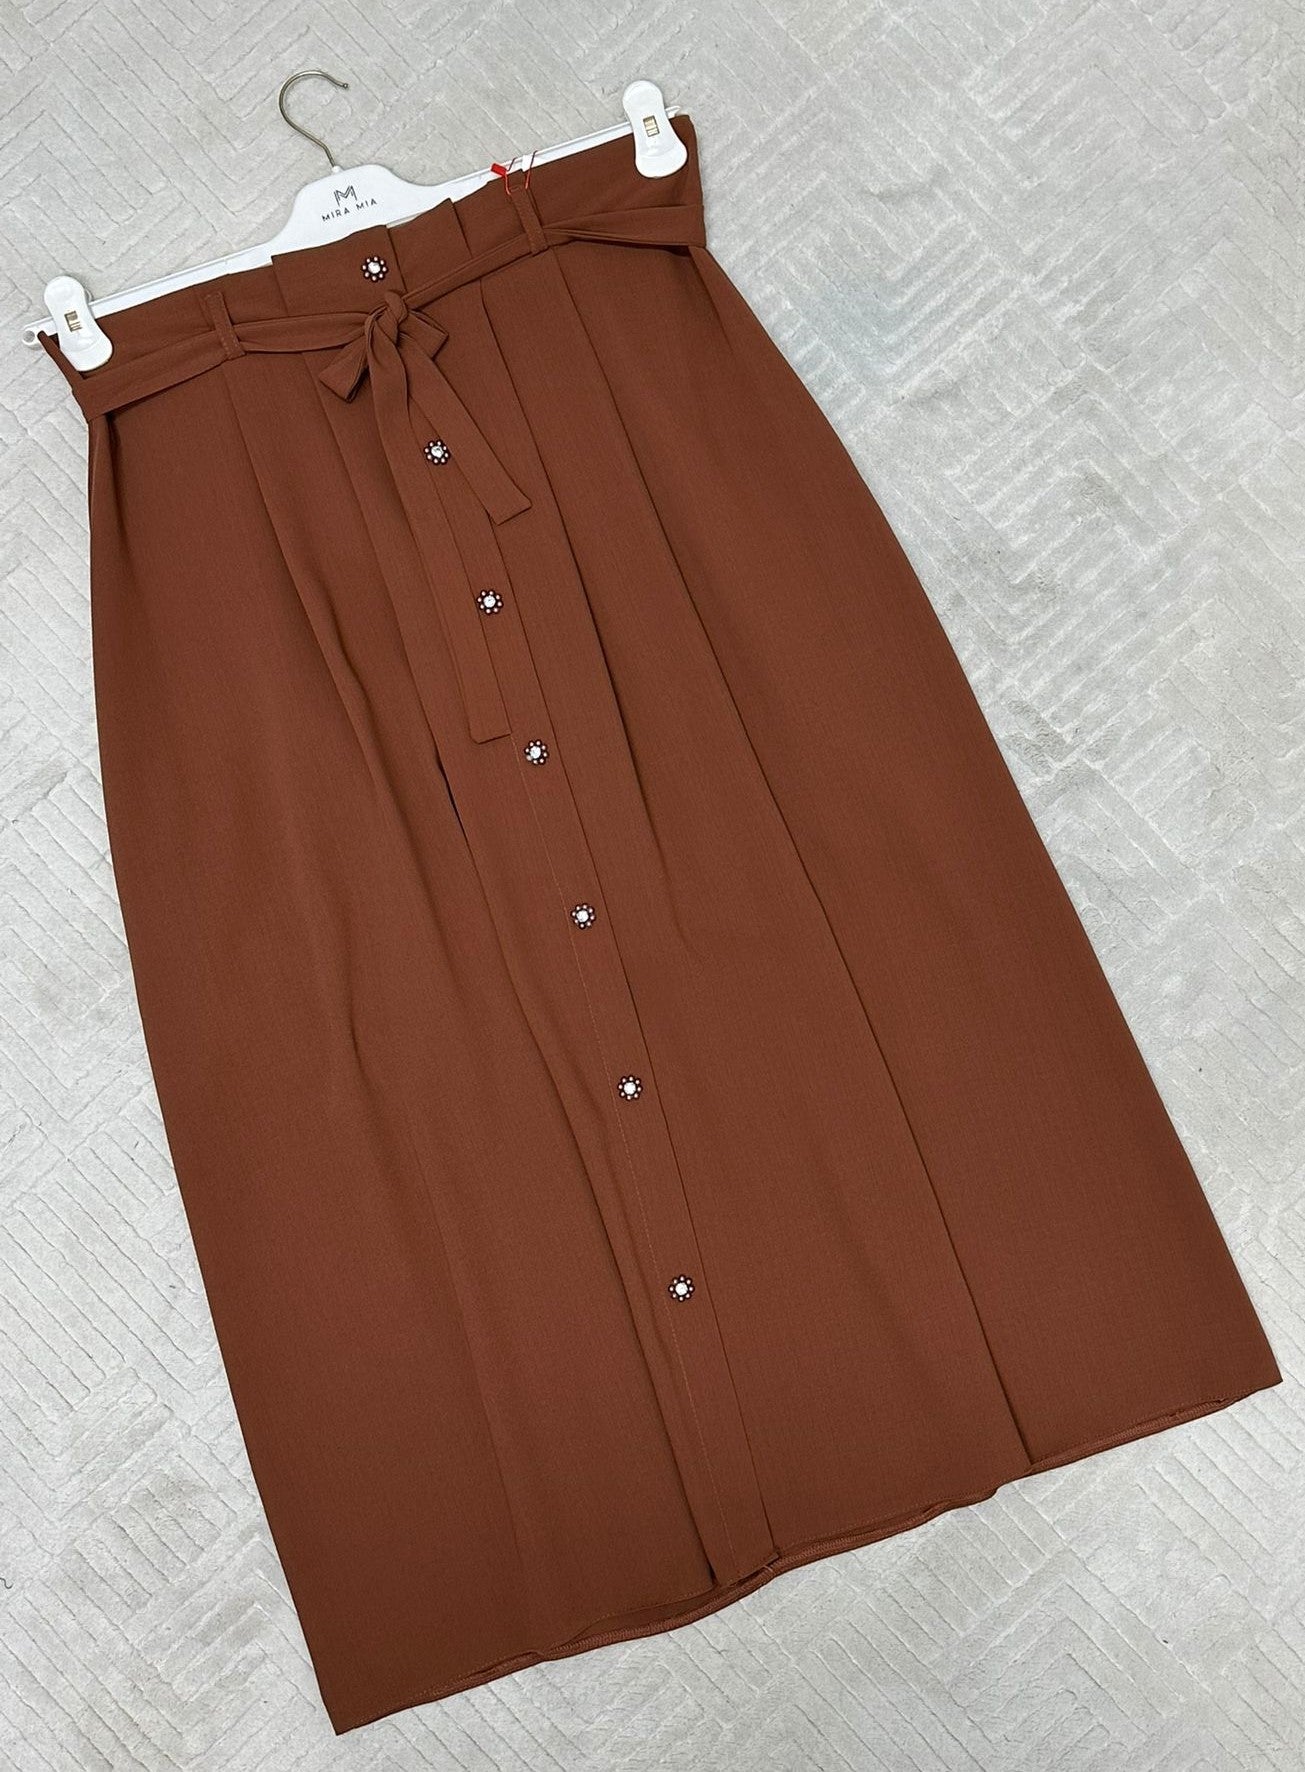 Simply pleated Wide Skirt with Belt (length 37 inch / 95 cm)